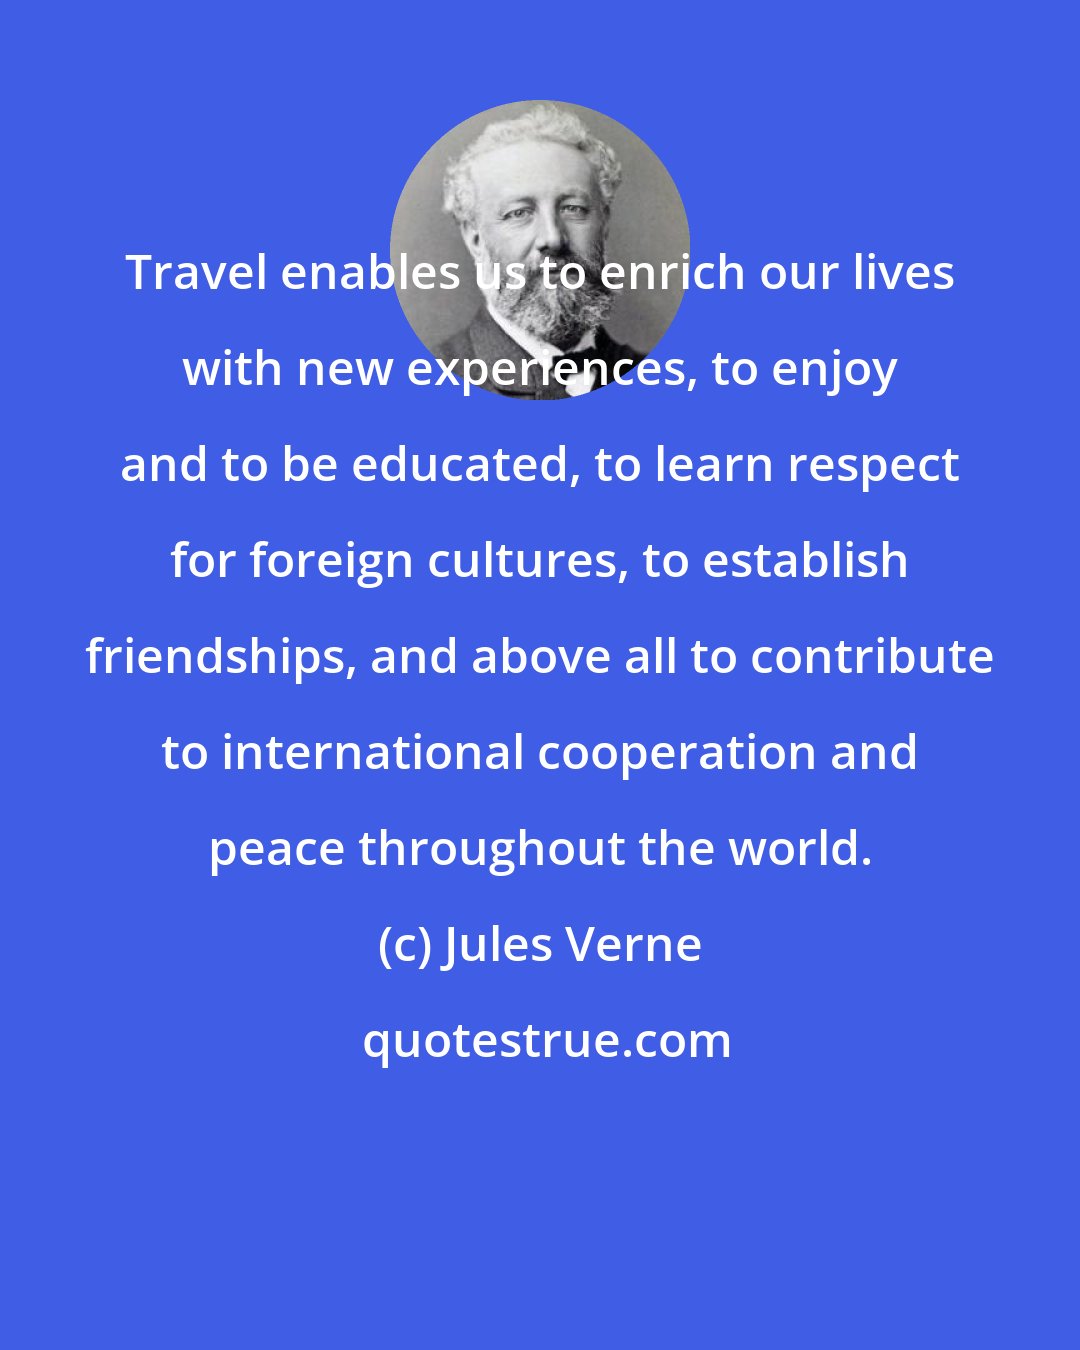 Jules Verne: Travel enables us to enrich our lives with new experiences, to enjoy and to be educated, to learn respect for foreign cultures, to establish friendships, and above all to contribute to international cooperation and peace throughout the world.